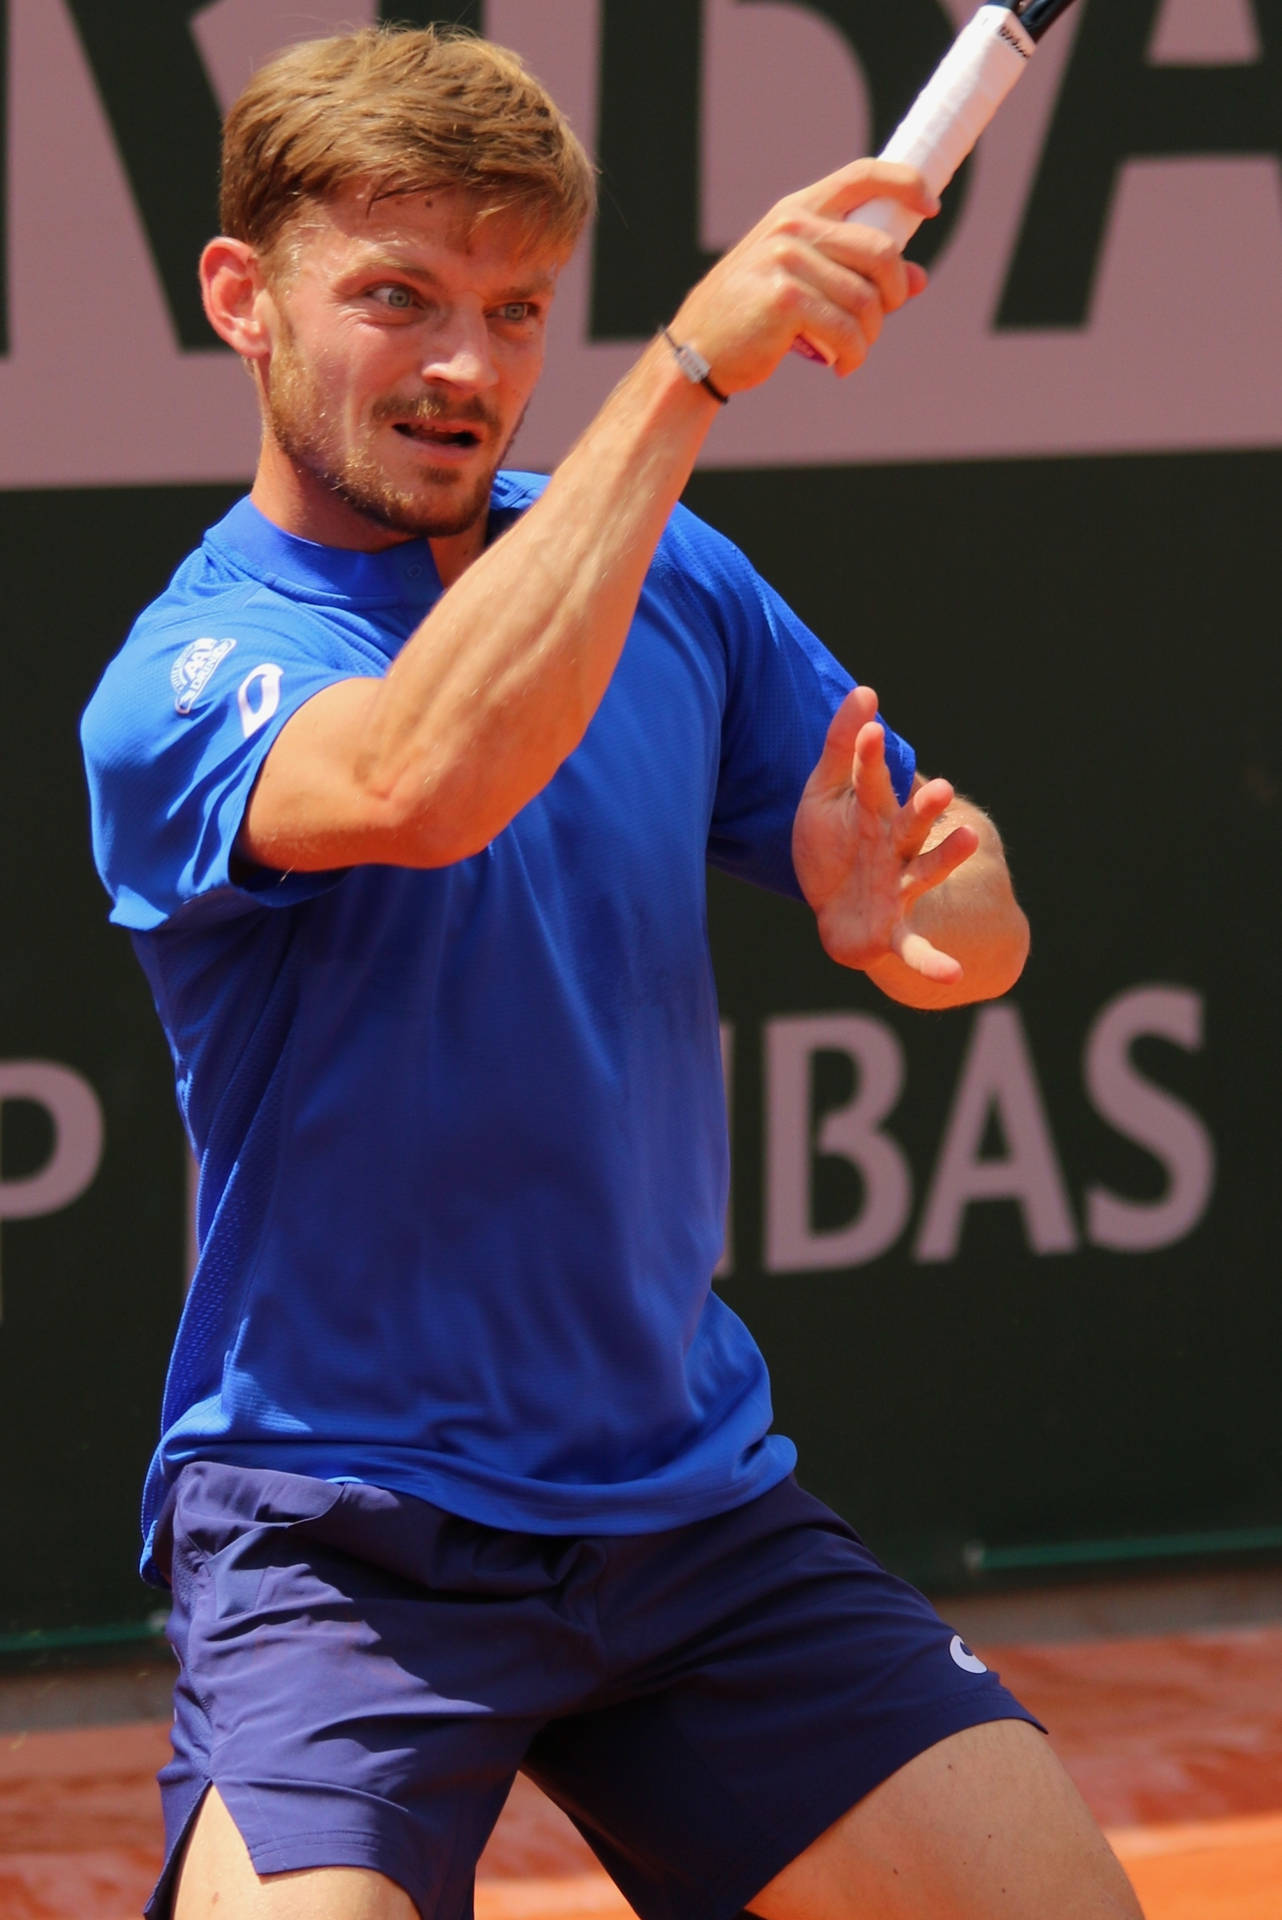 Professional Tennis Player David Goffin, Wearing a Blue Outfit During a Match Wallpaper